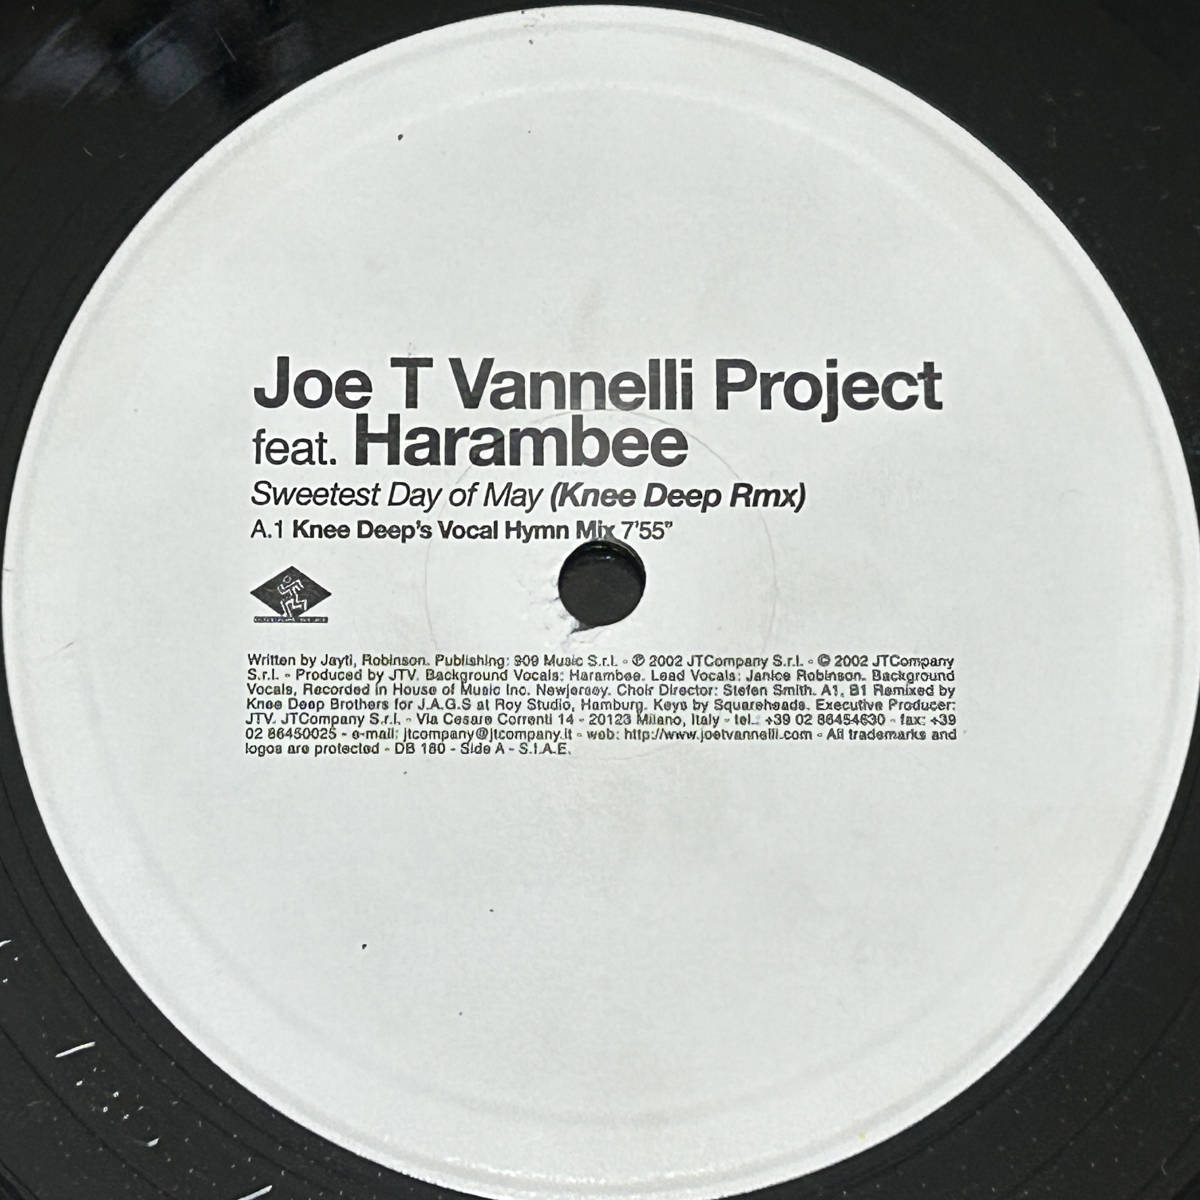  audition masterpiece Joe T. Vannelli Project feat. Harambee Sweetest Day Of May (Knee Deep Rmx) 2002 year 